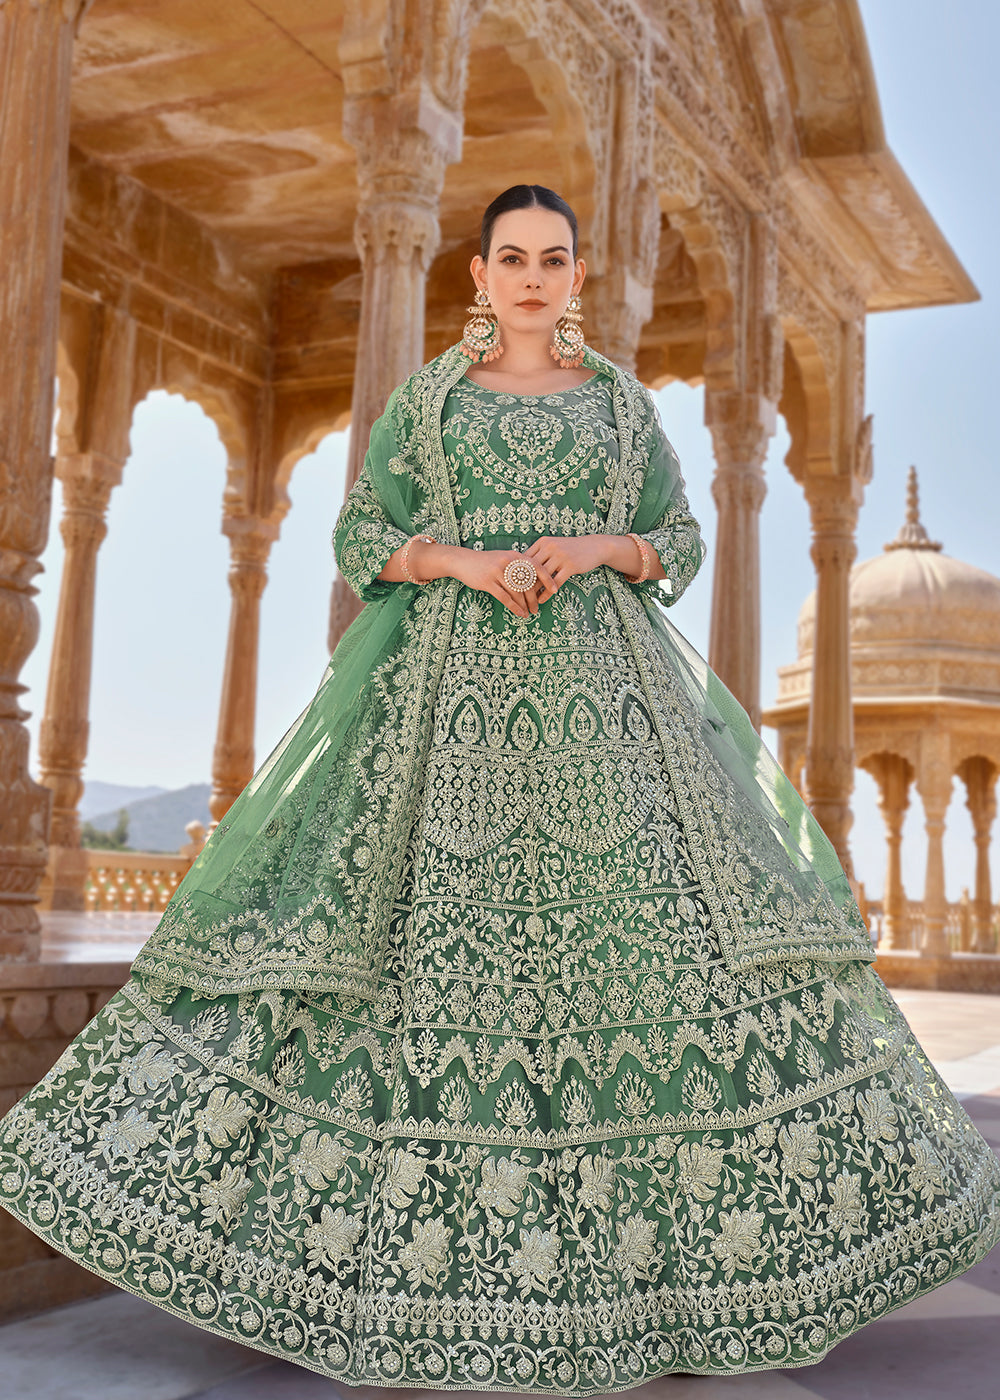 Buy Now Mint Green Front & Back Stone Embroidered Wedding Anarkali Suit Online in USA, UK, Australia, New Zealand, Canada & Worldwide at Empress Clothing.